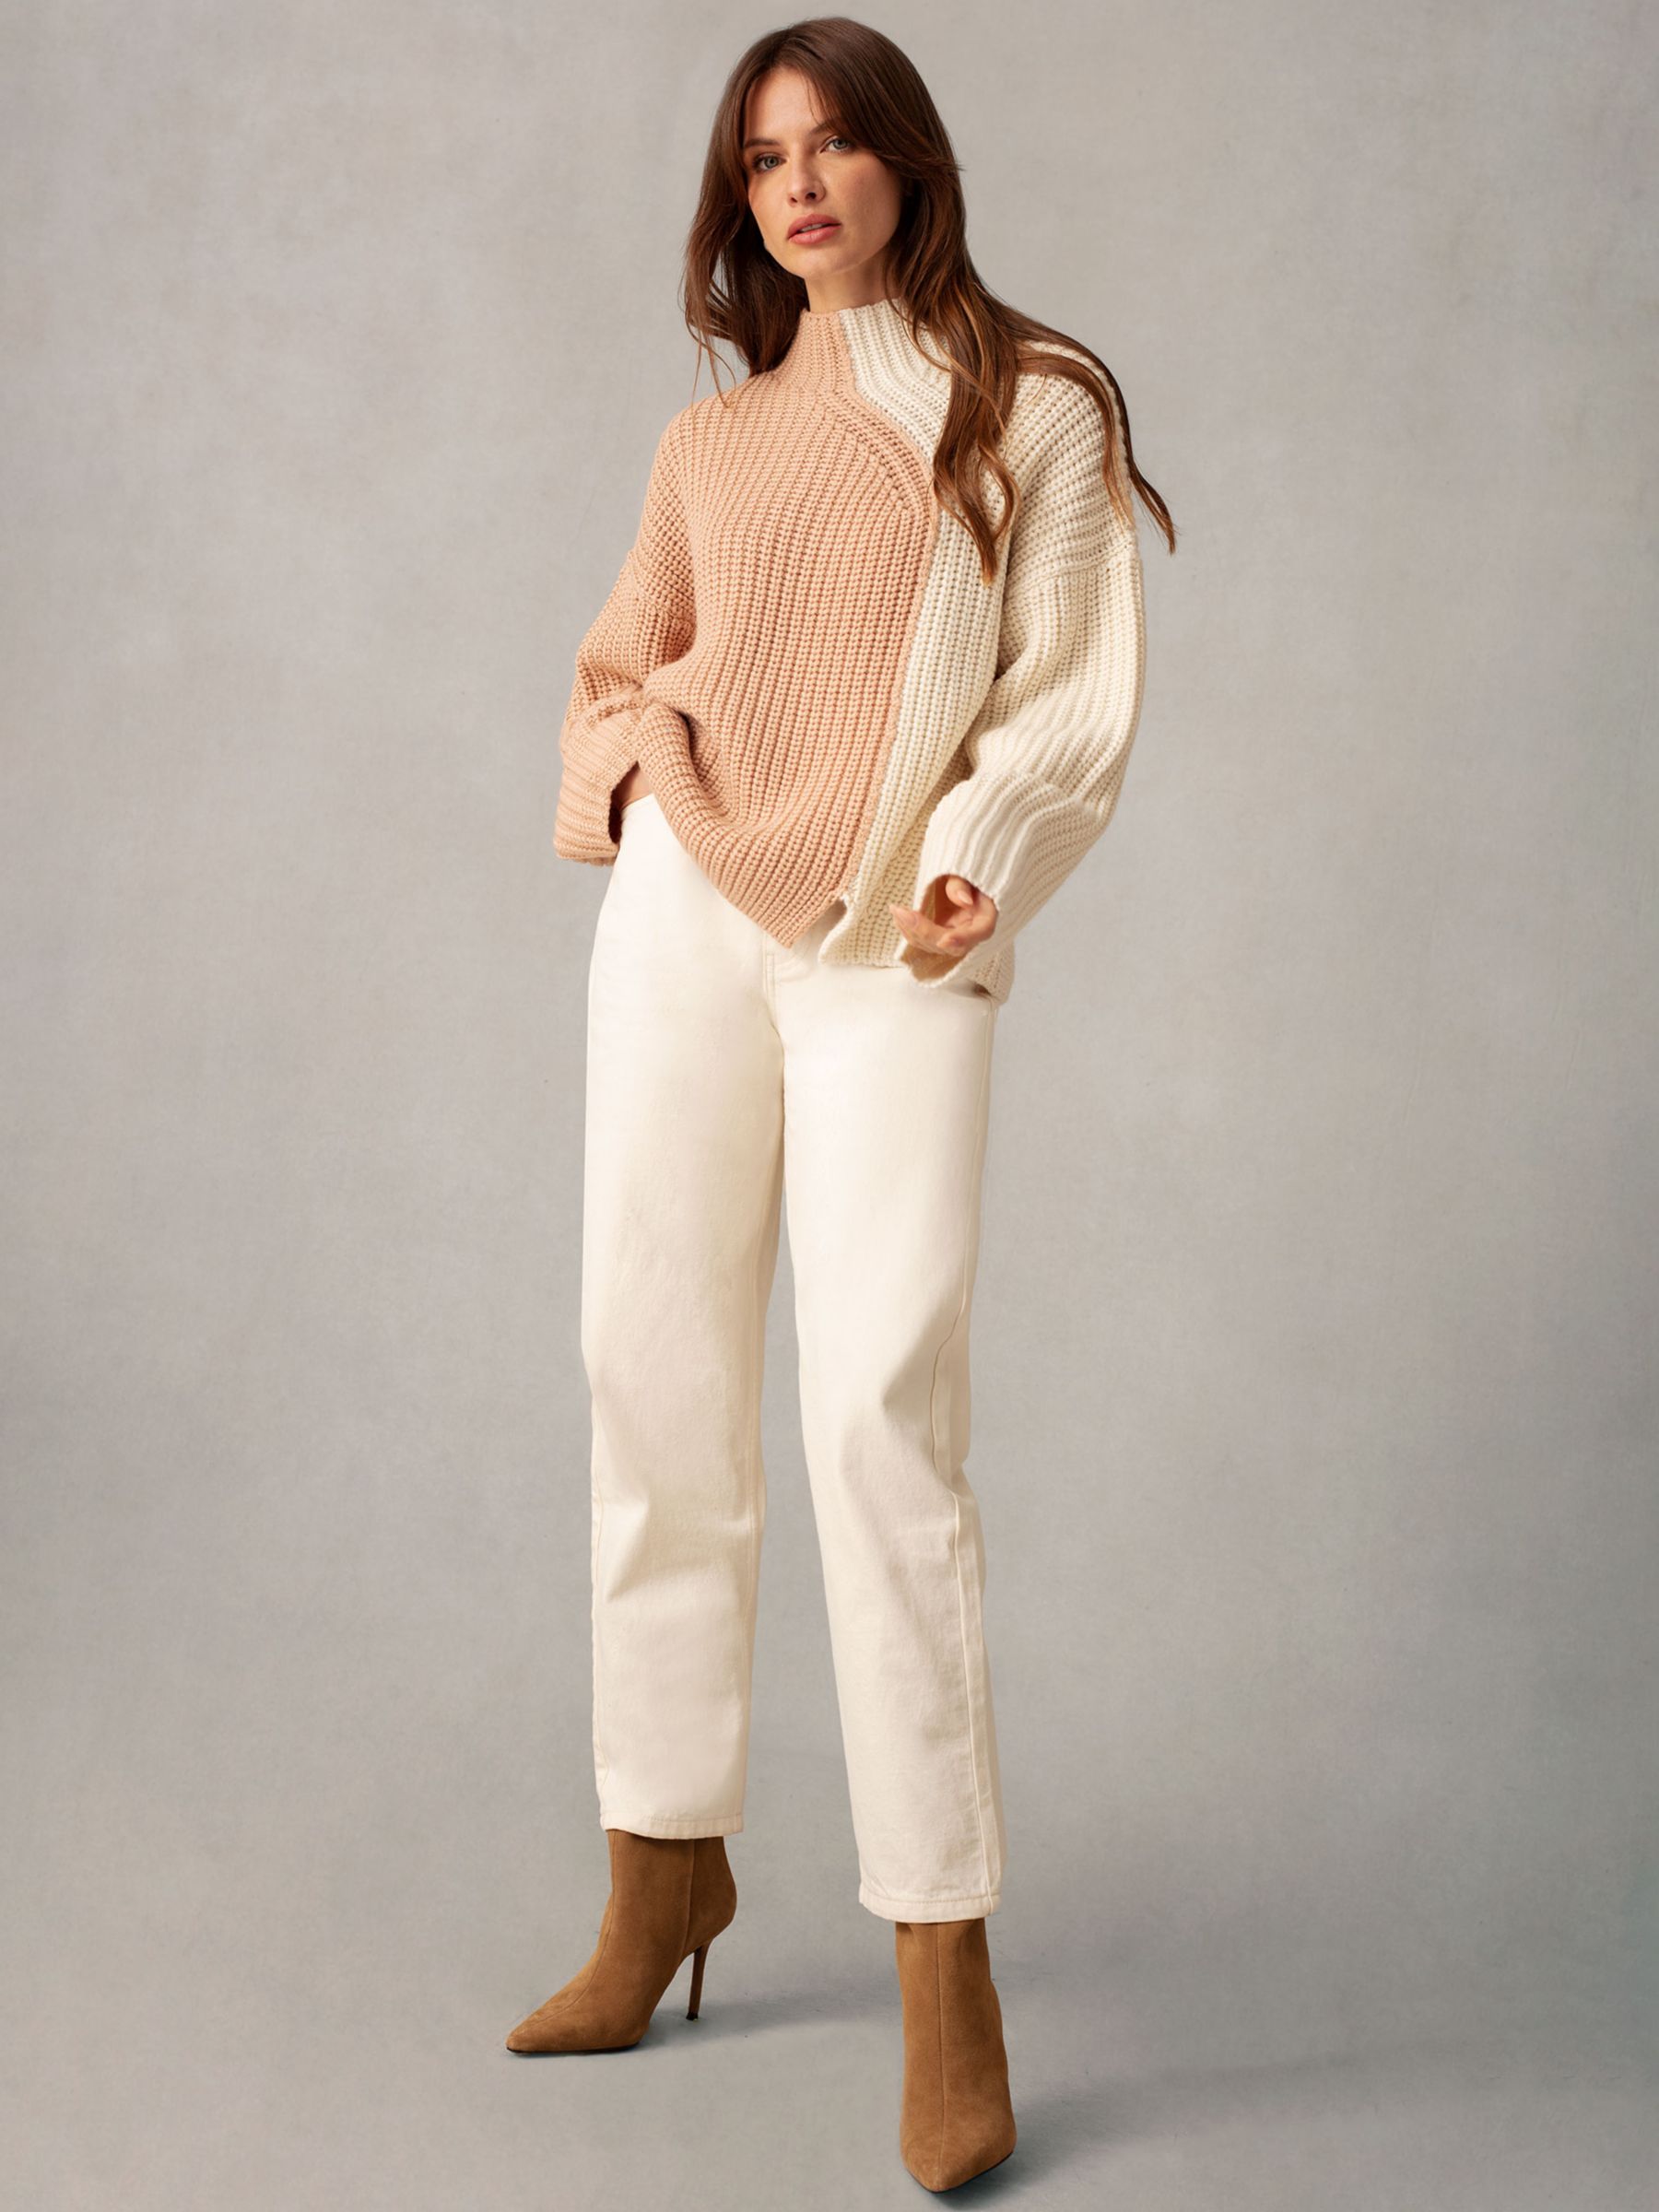 Buy Ro&Zo Two Tone Chunky Rib Knit Turtleneck Jumper Online at johnlewis.com